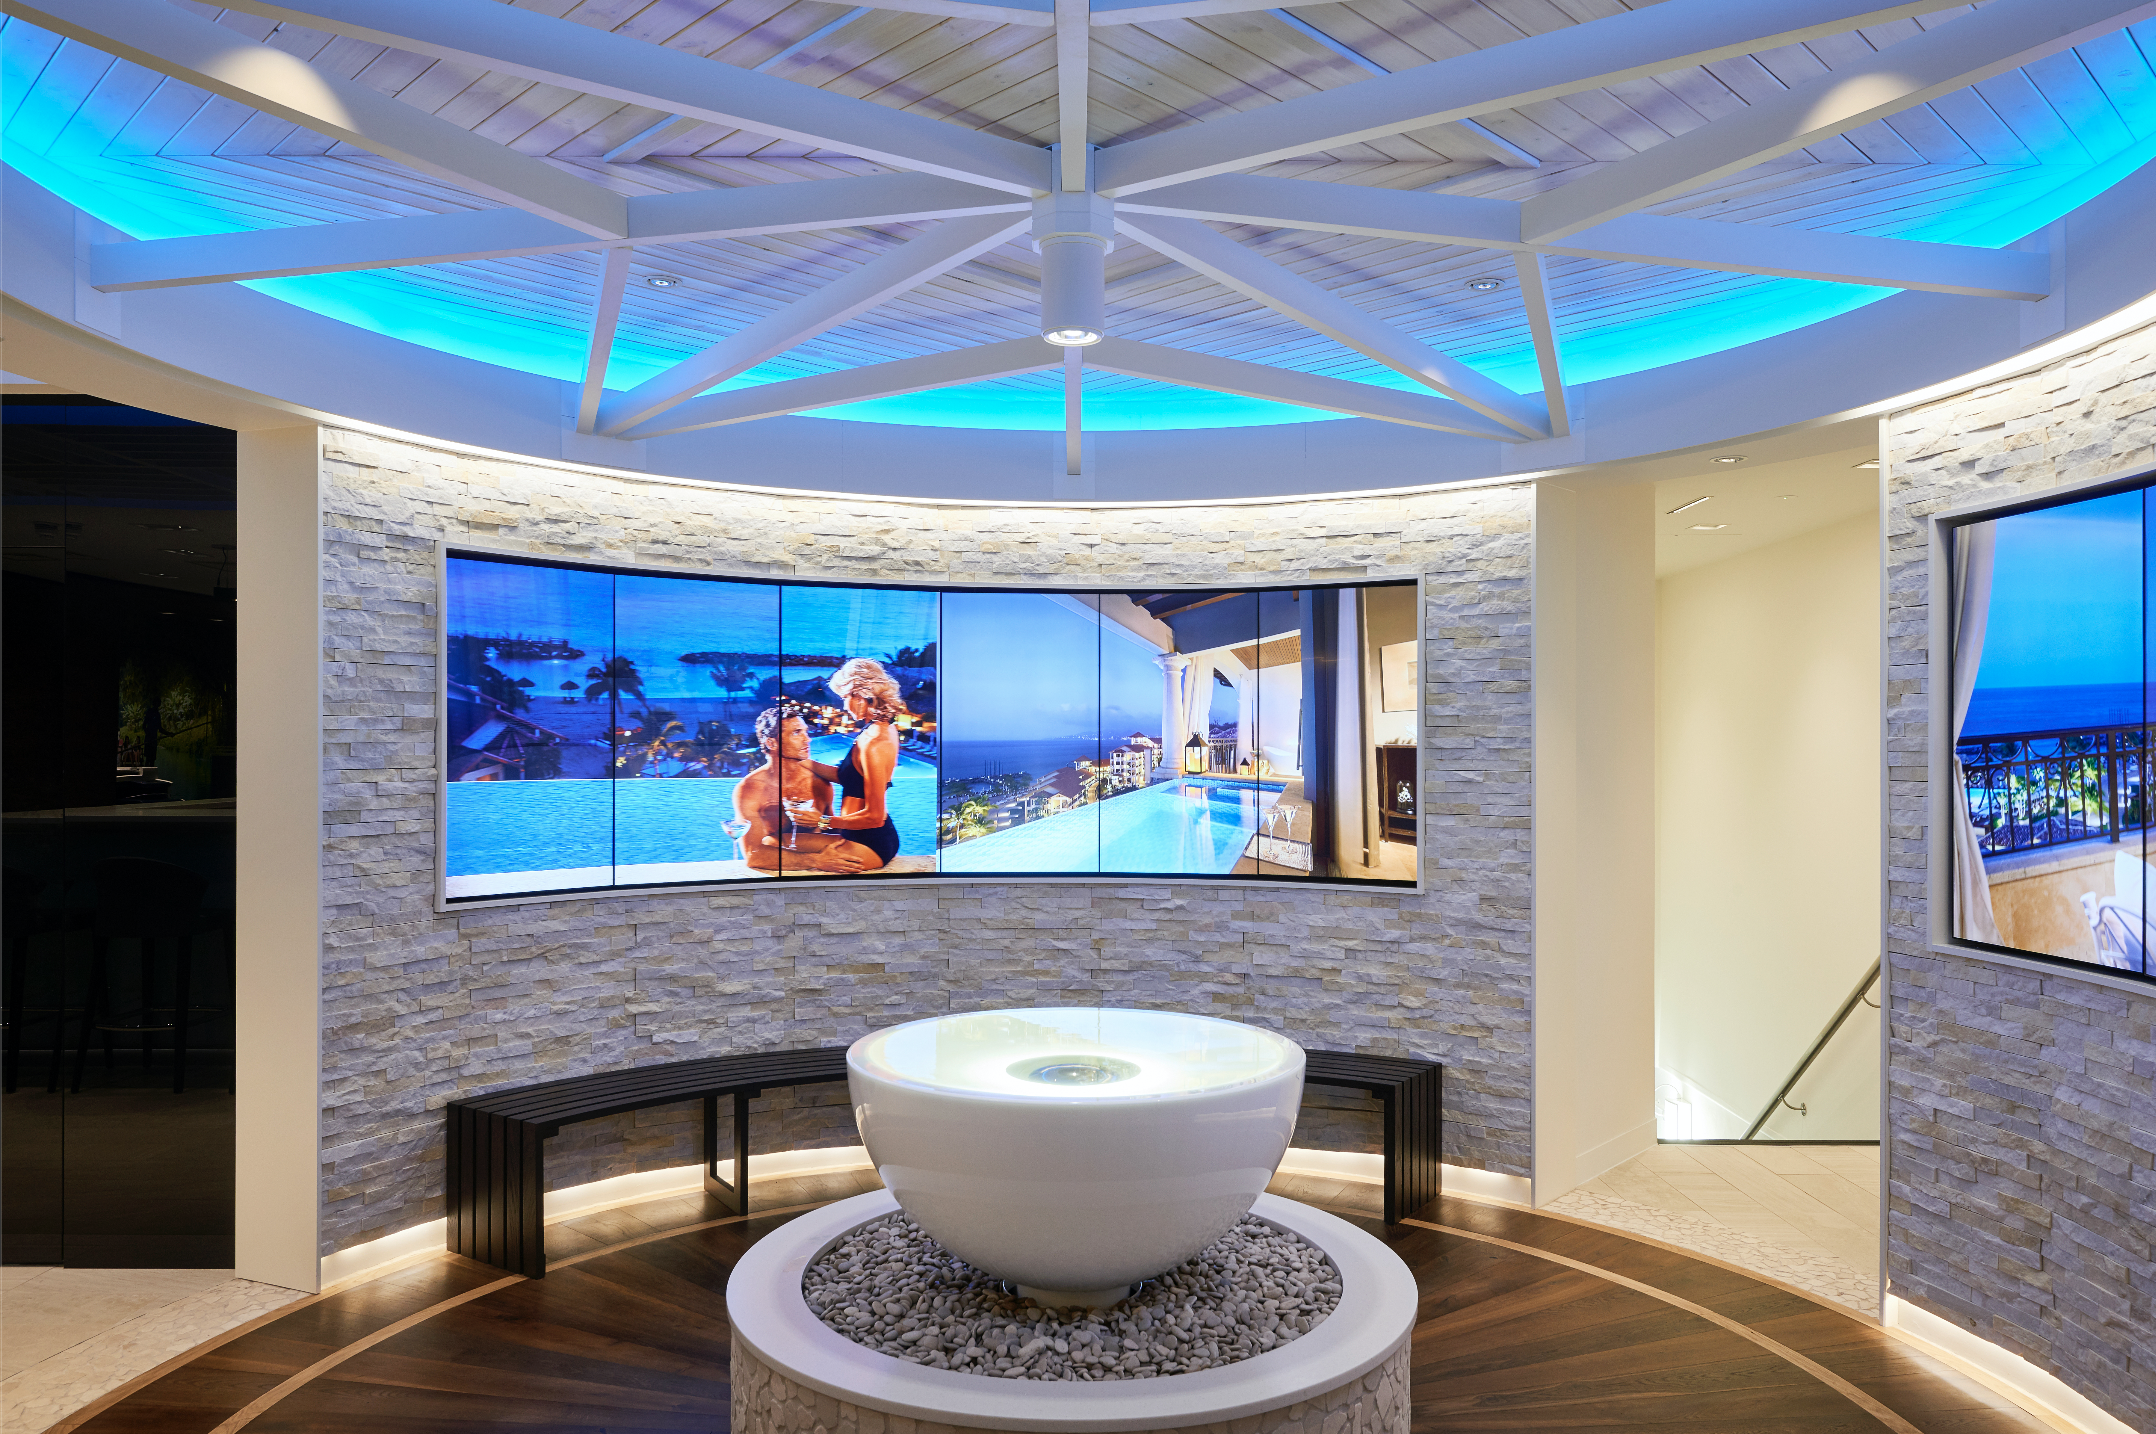 Why choosing one AV company will offer you the best possible service